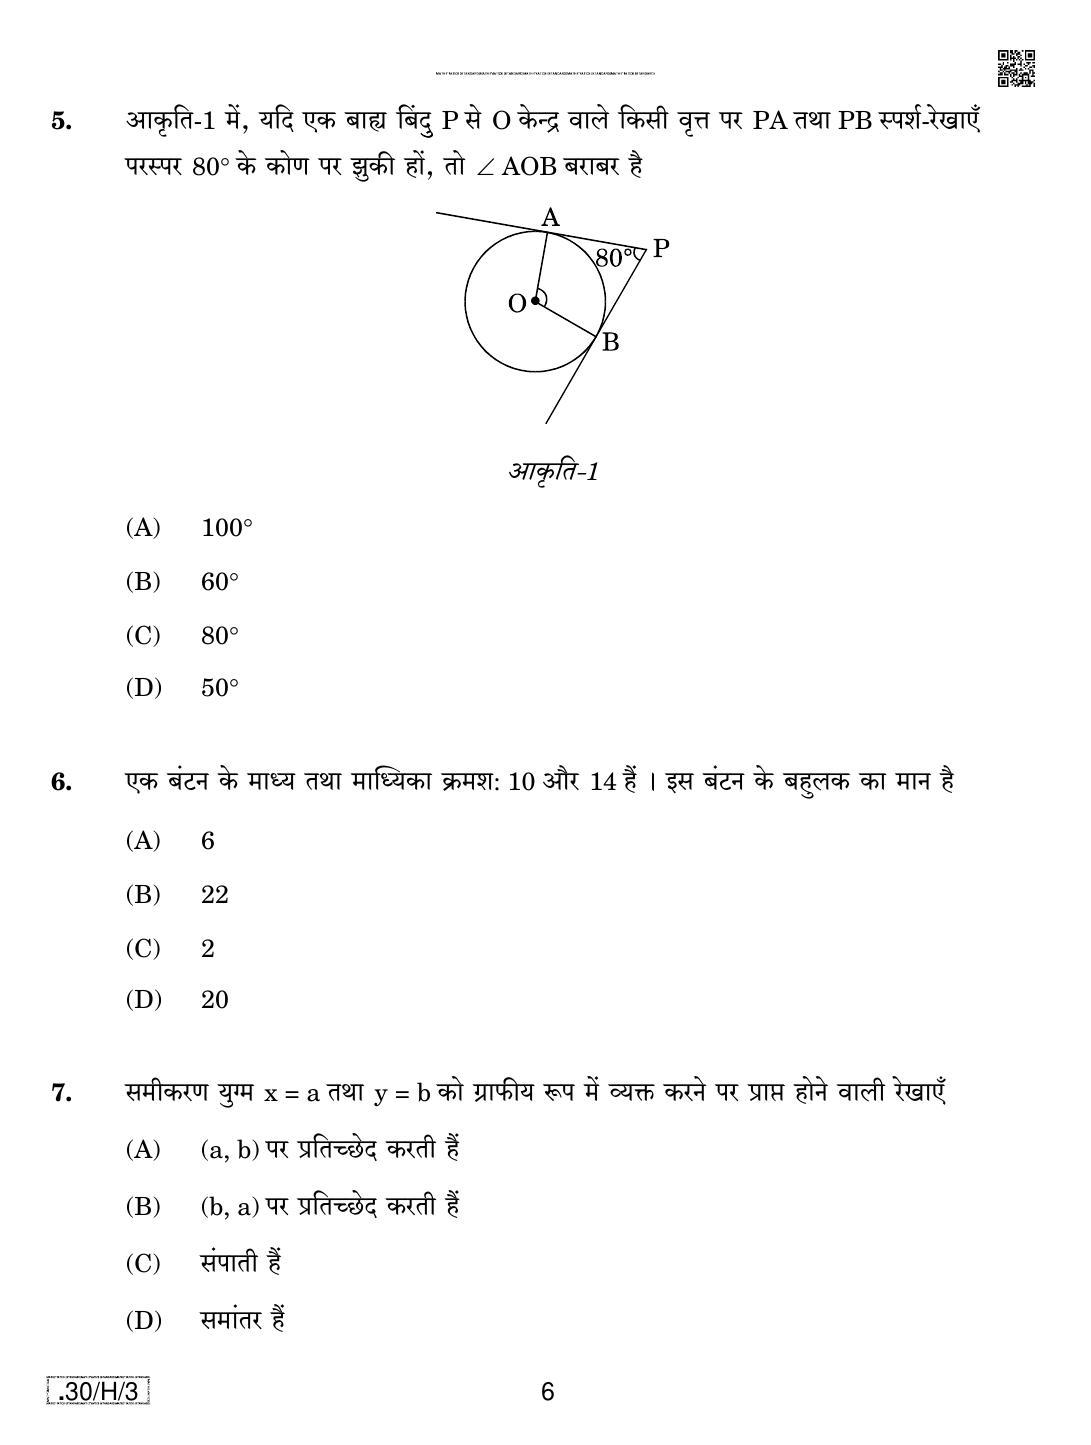 CBSE Class 10 30-C-3 - Maths (Standard) 2020 Compartment Question Paper - Page 6